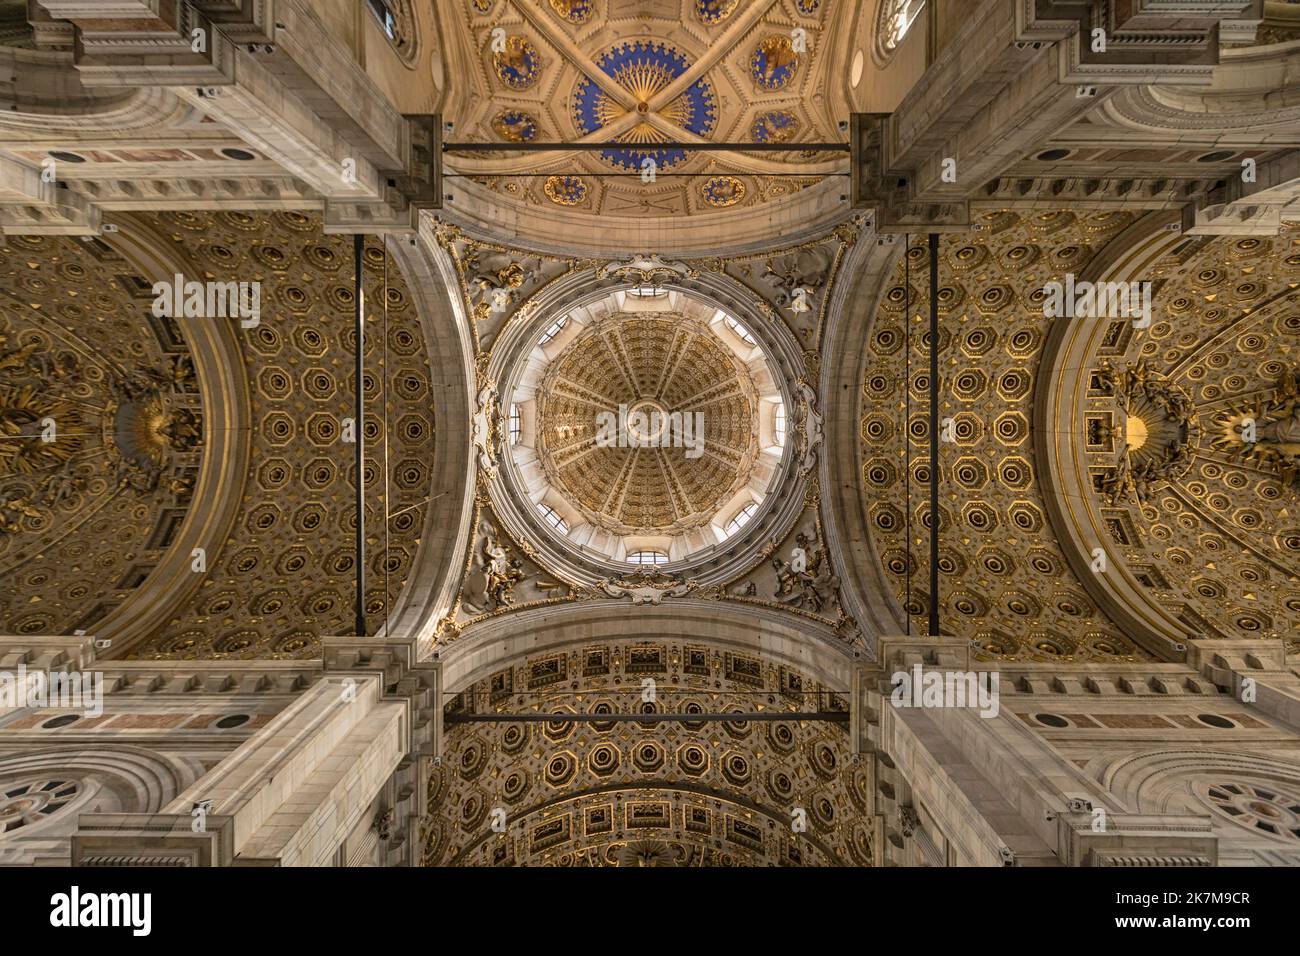 Vault of Como Cathedral or Cattedrale di Santa Maria Assunta or Duomo di Como with the 75 meter high dome in center. Stock Photo